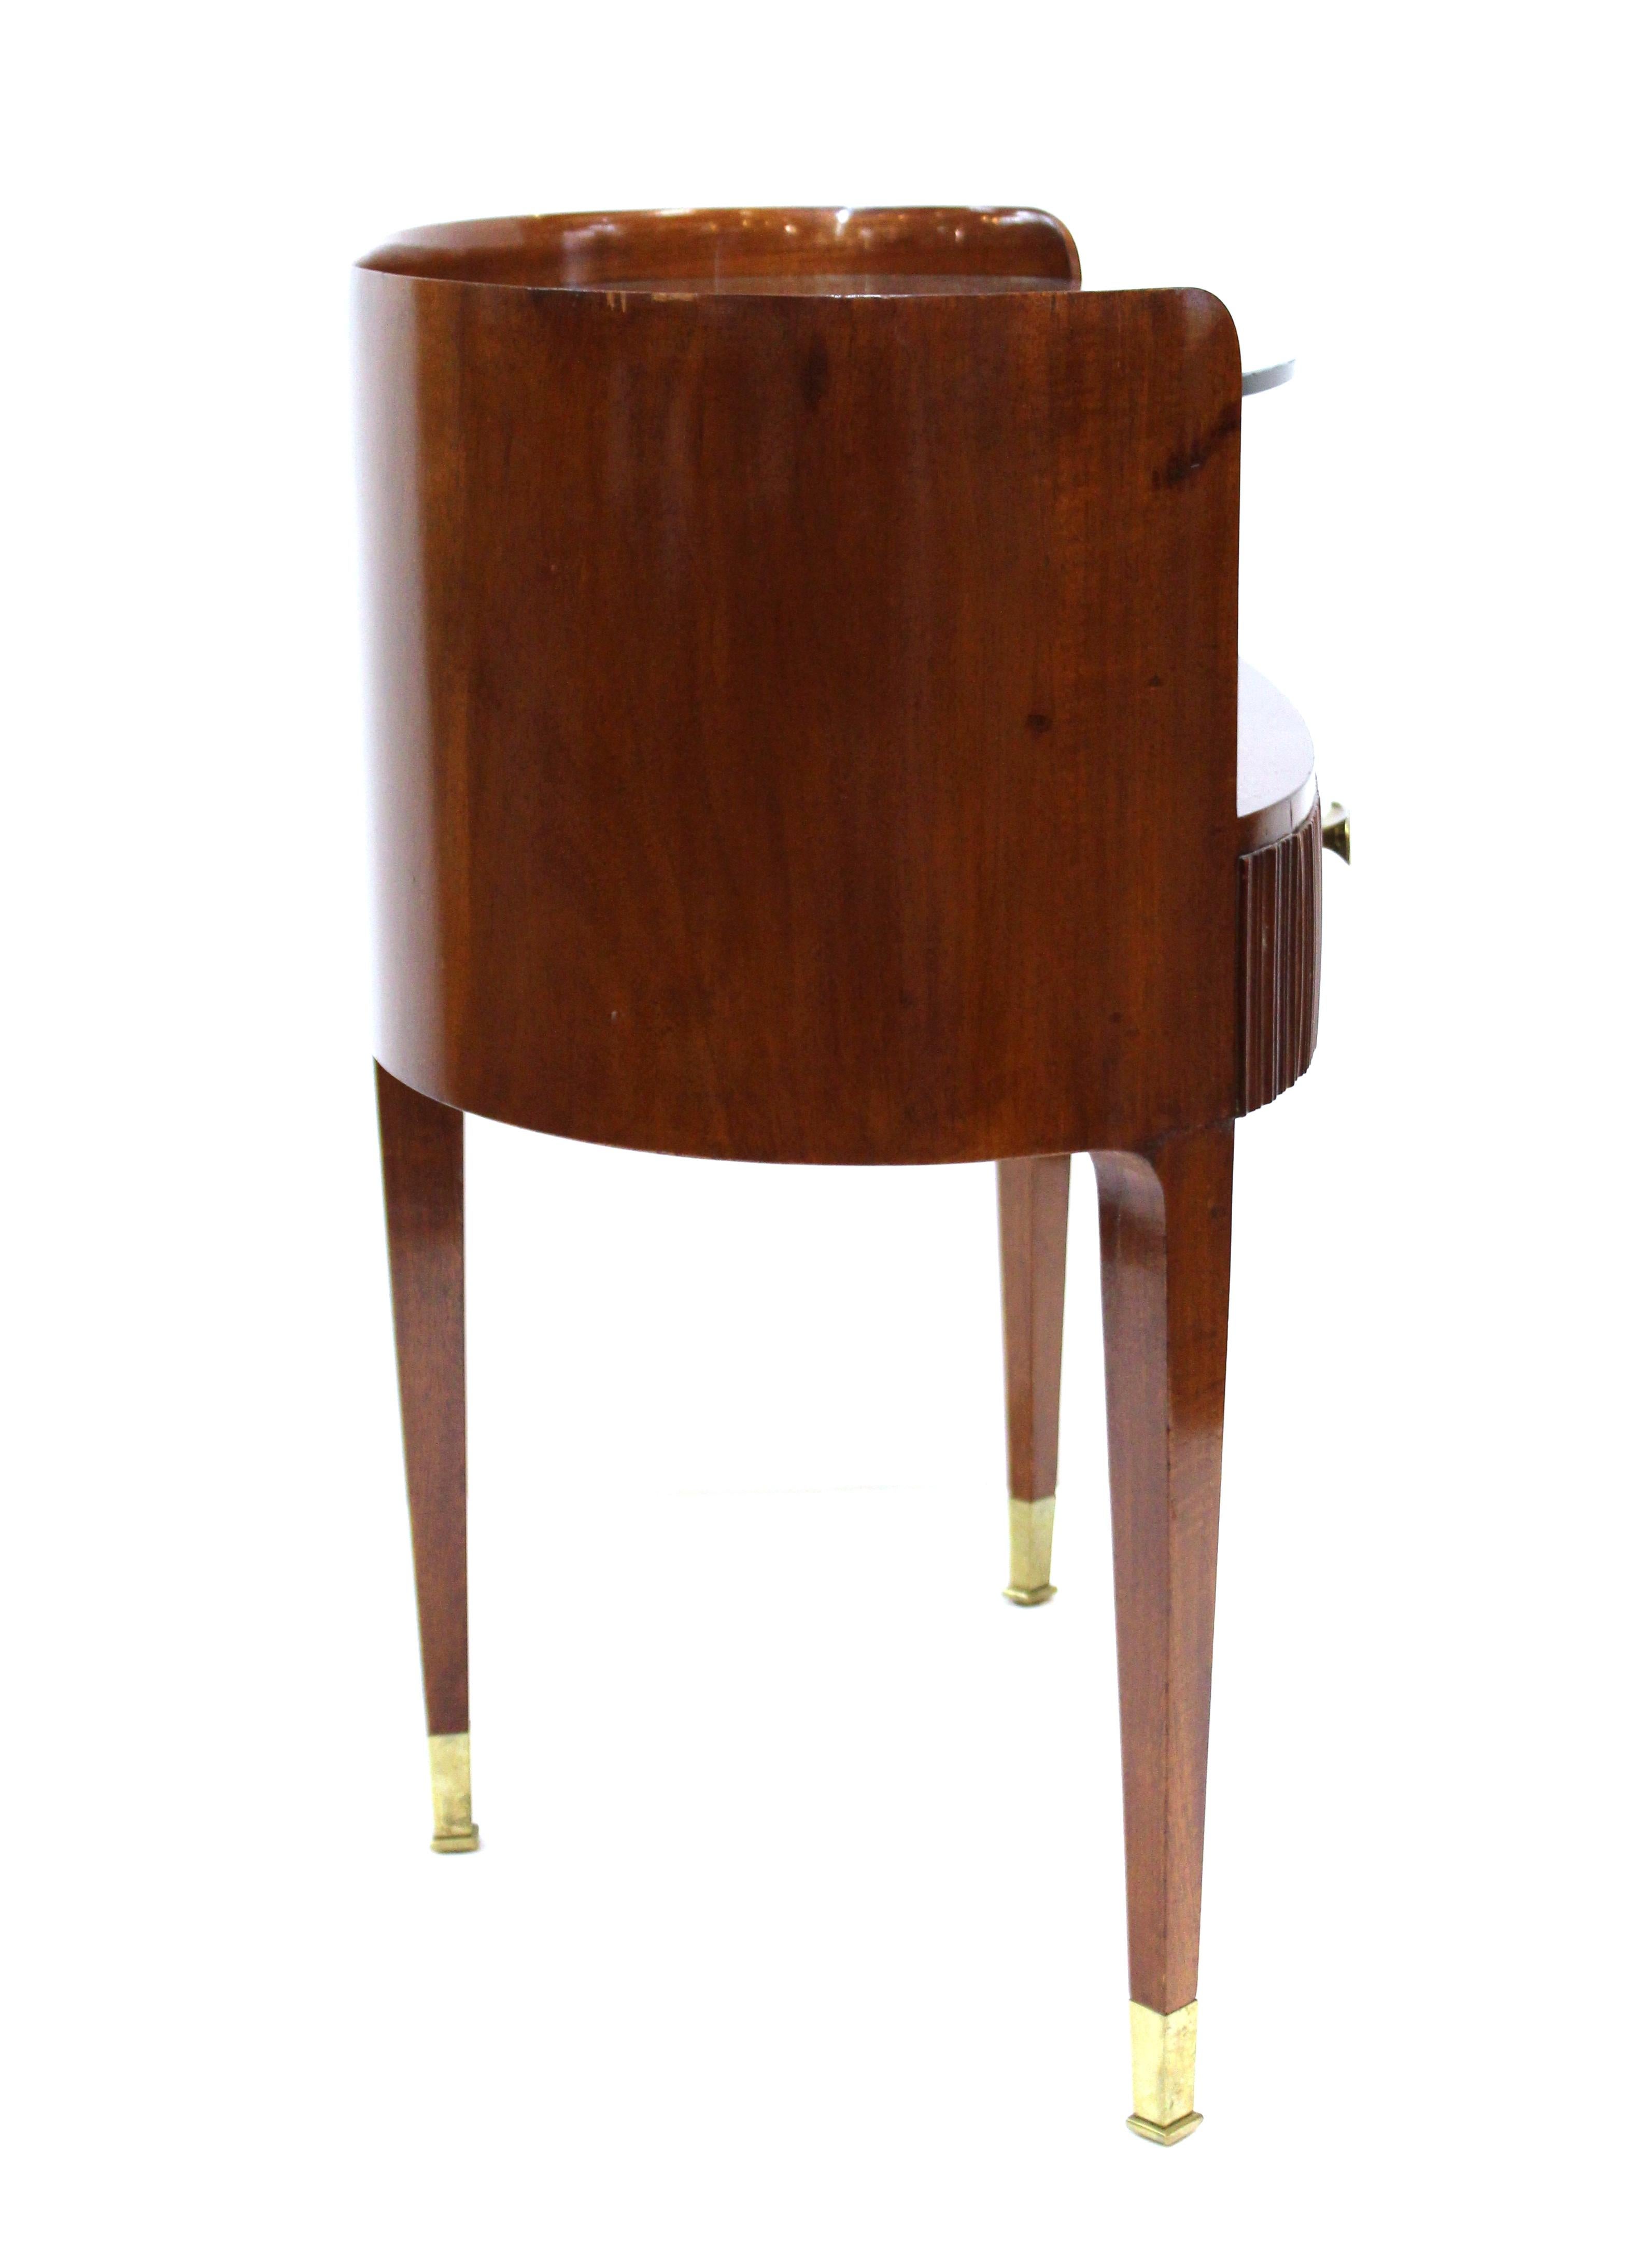 Mid-20th Century Riva Mobili D'Arte Italian Modernist Carved Wood Tripod Side or End-tables